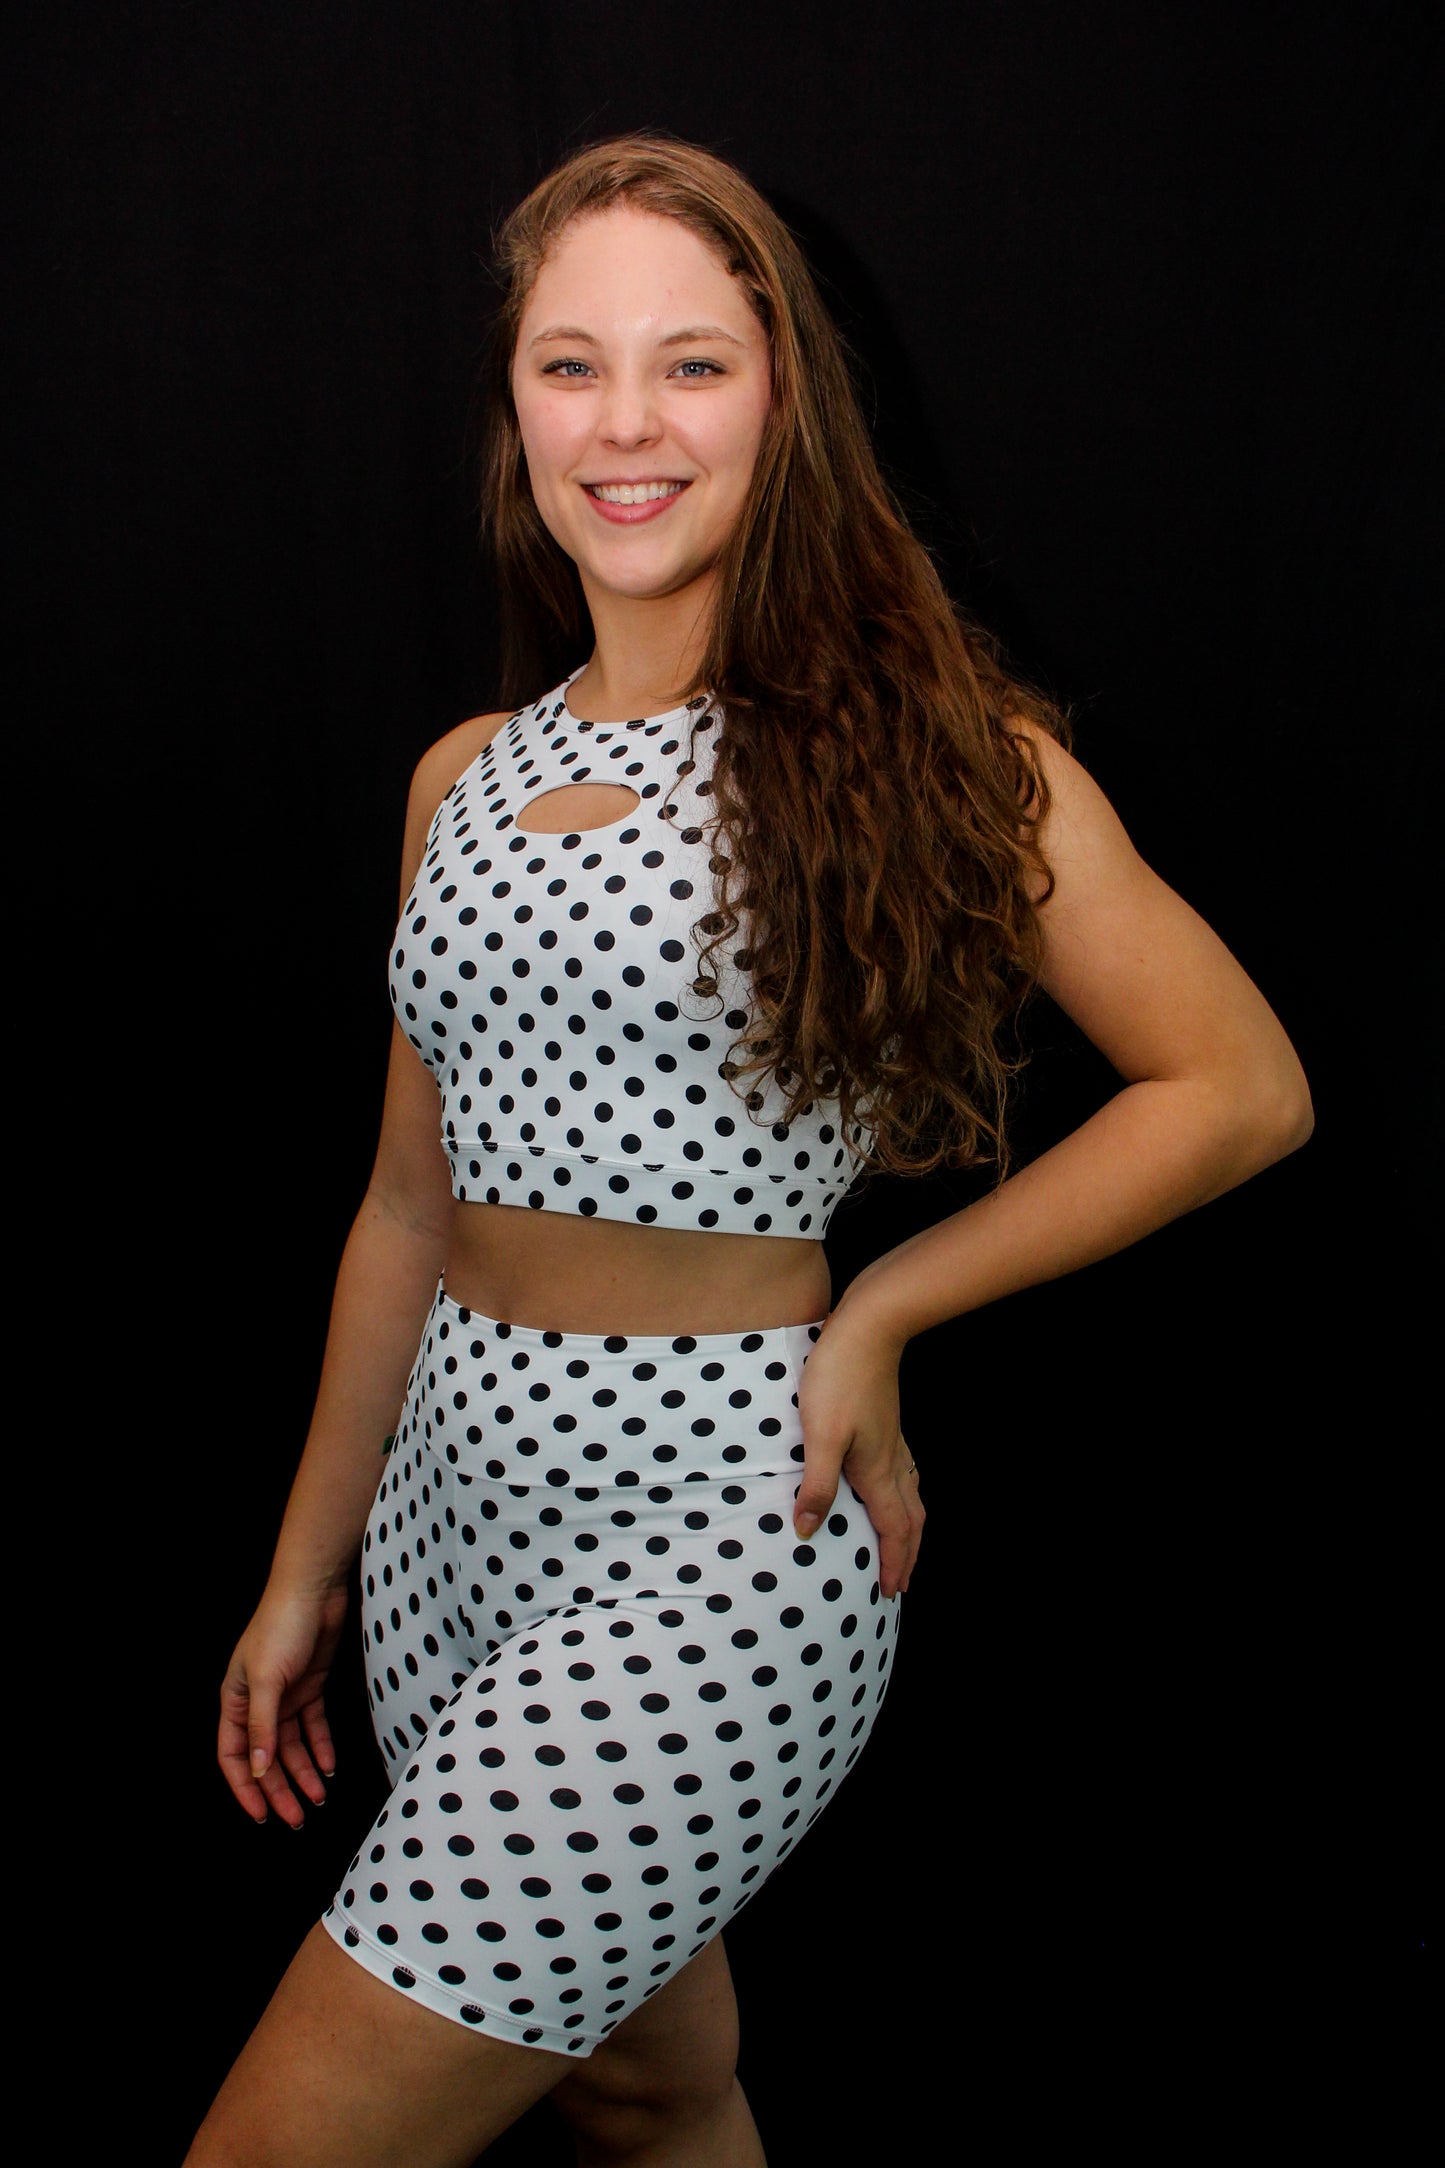 Dots Shorts 6" high waist with pocket - Black and White